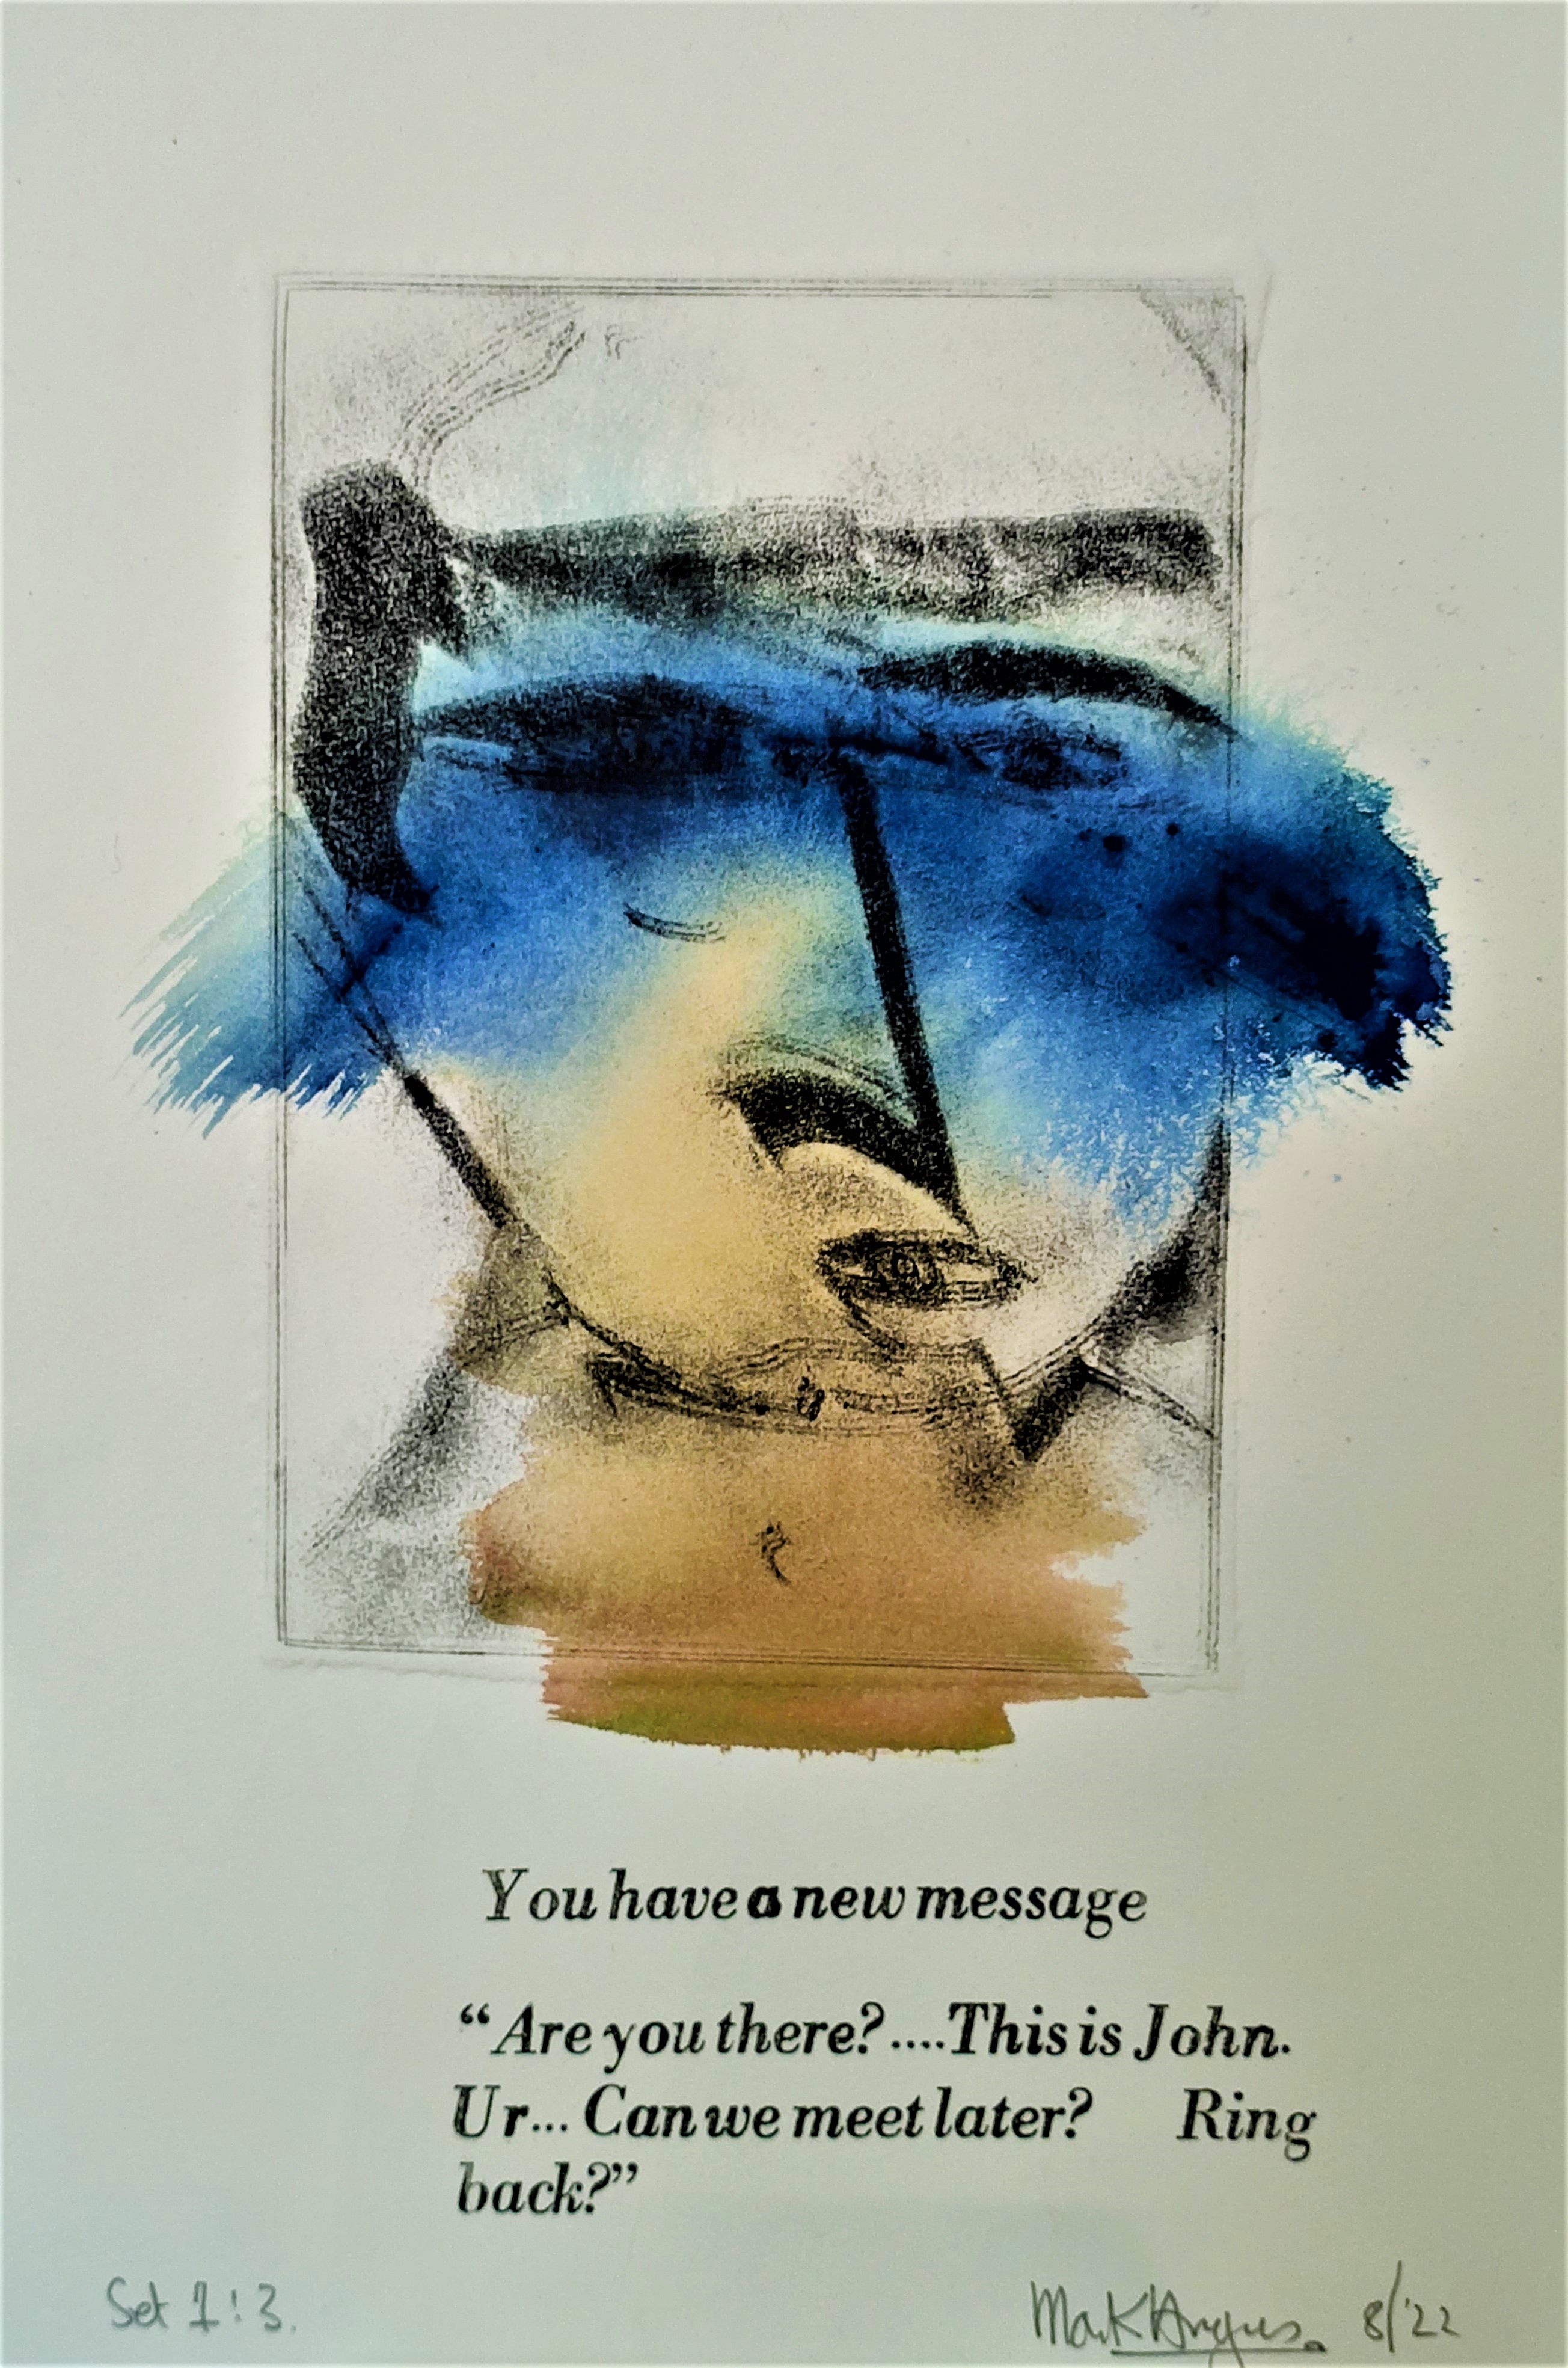 You have a new message Set 1 - 3 Vitreography and text